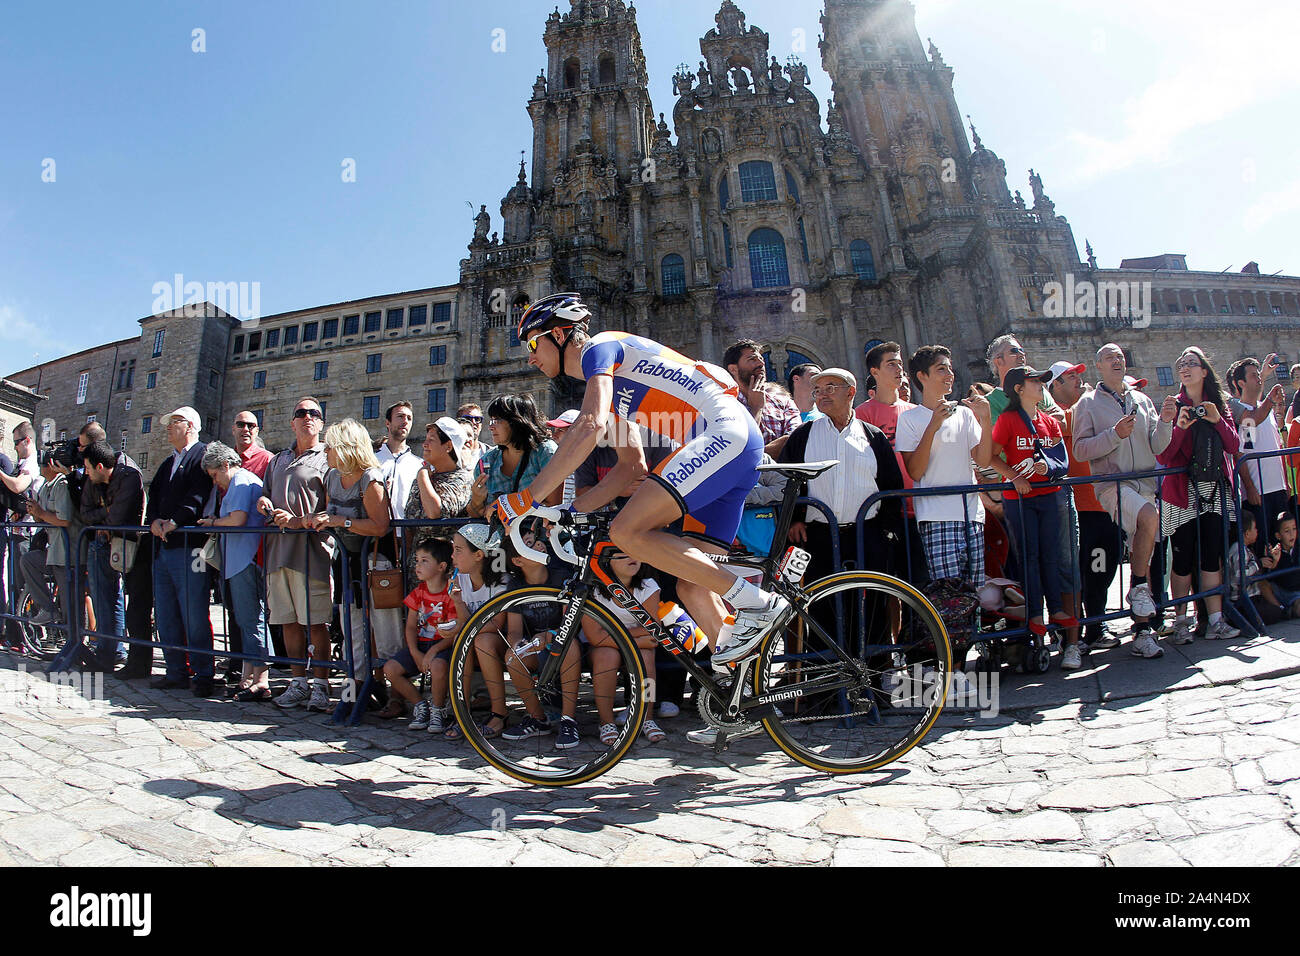 Bauke Mollema passes by the front of the Obradoiro of the Cathedral of Santiago de Compostela before the stage of La Vuelta 2012 between Santiago de C Stock Photo